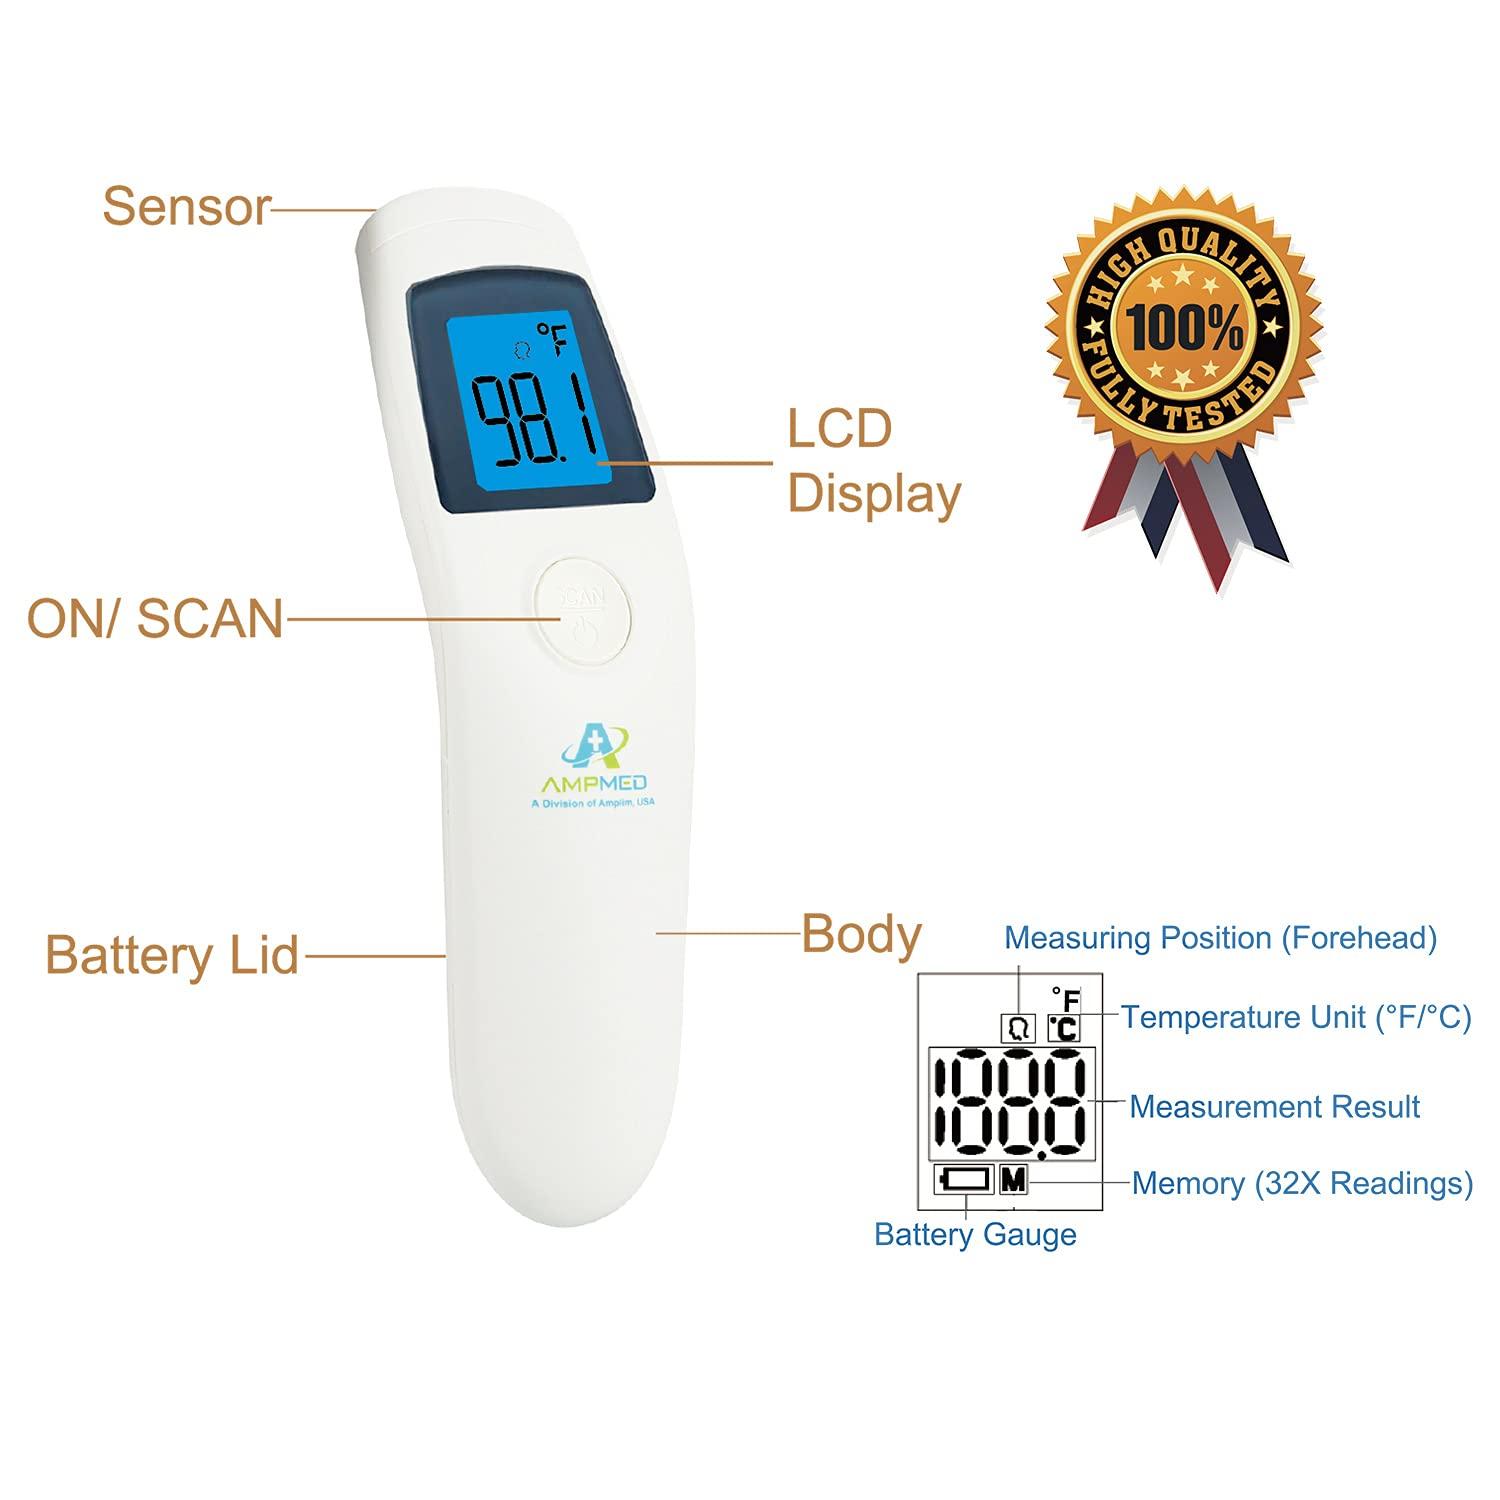 Medical Instrument Baby Thermometer Ear and Forehead Heat Thermometer Gun  Manufacture - China Baby Thermometer Ear and Forehead, Heat Thermometer Gun